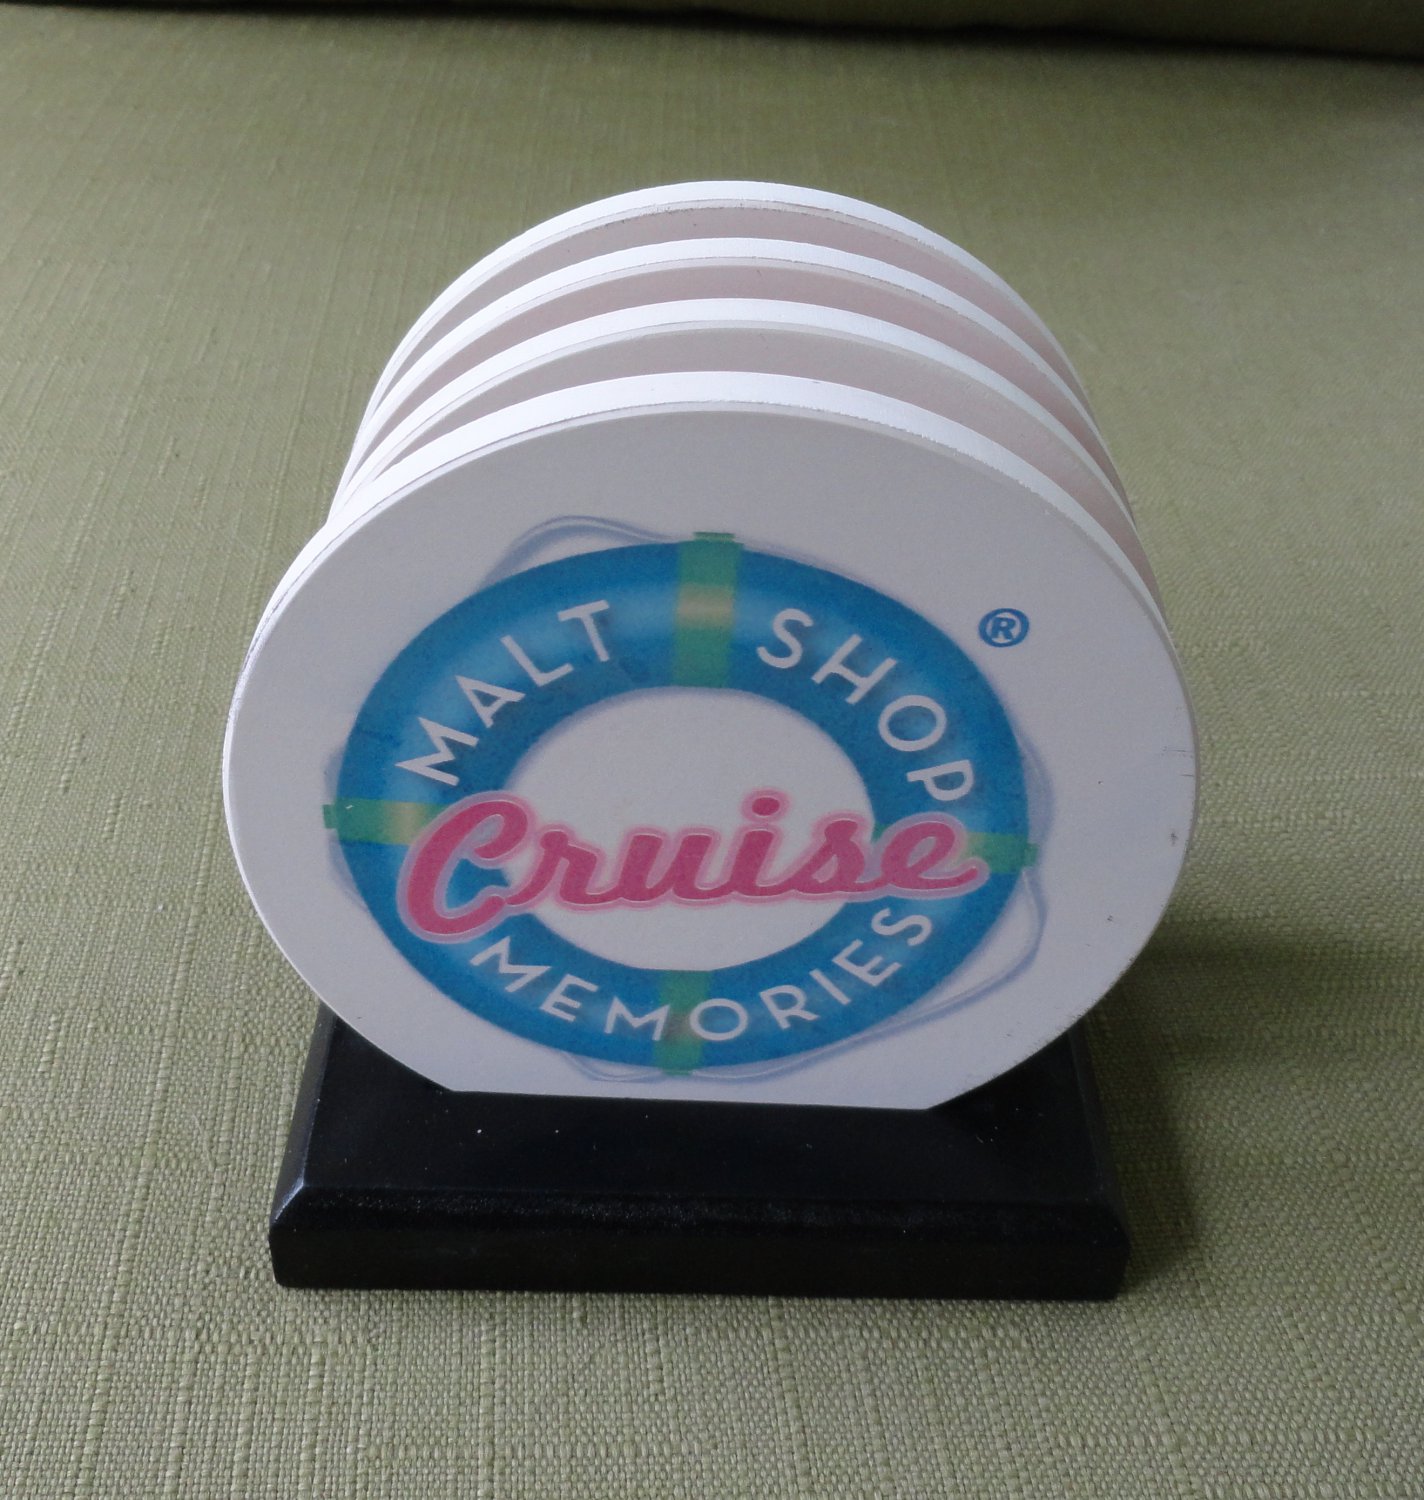 Malt Shop Memories Cruise Ceramic Drink Coasters with Wood Stand